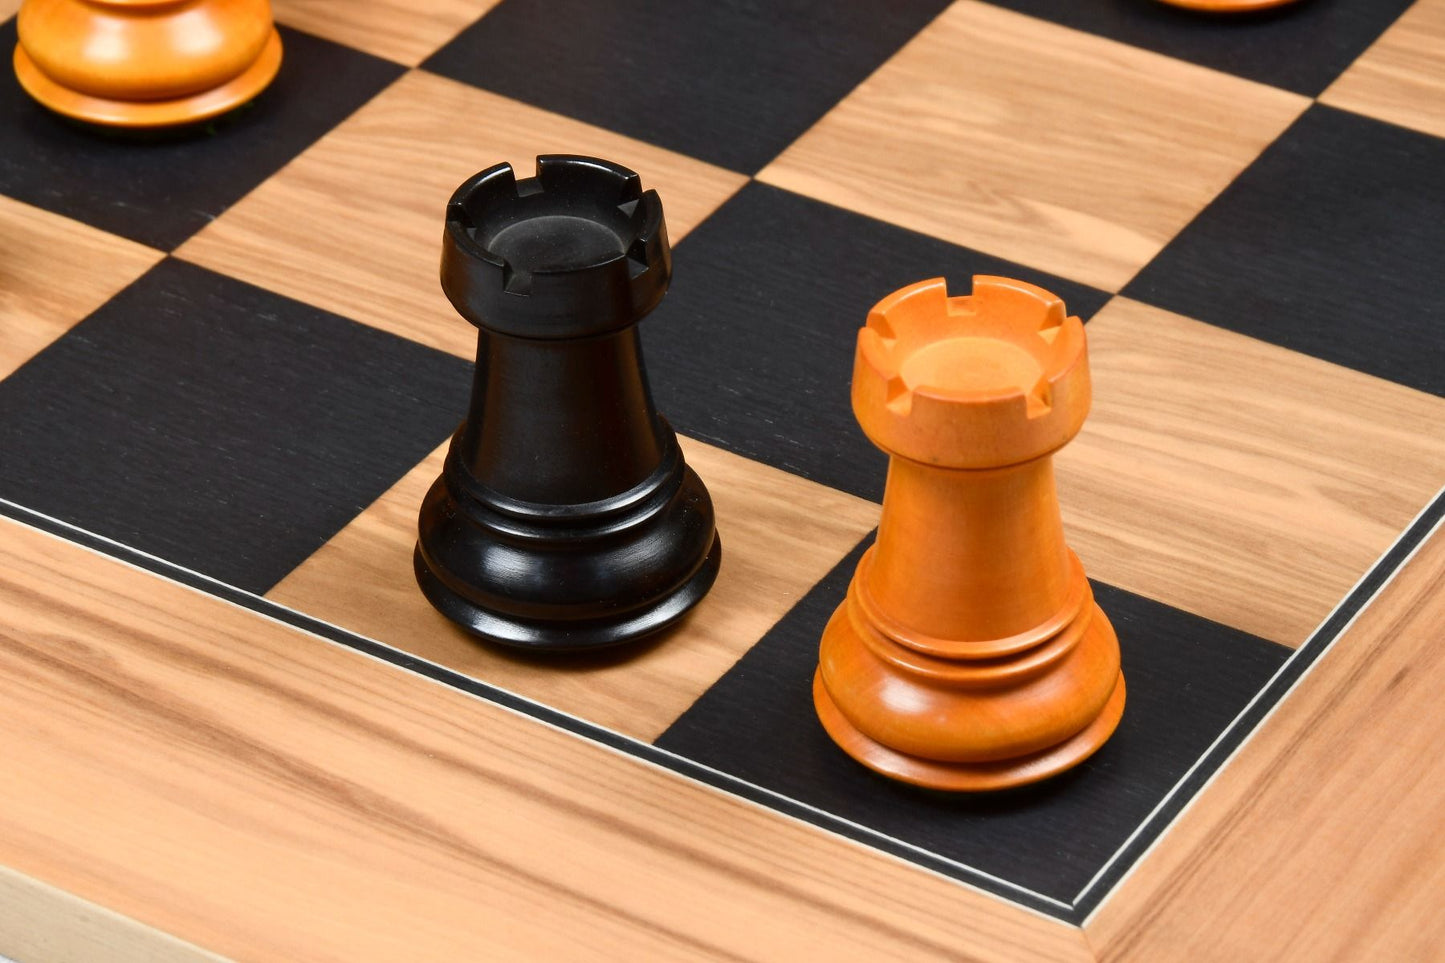 Combo of 1950 Reproduced Dubrovnik Bobby Fischer Chessmen Version 3.0 in Ebonized & Antiqued boxwood - 3.7" King with Wooden Chess Board 22" - 55 mm